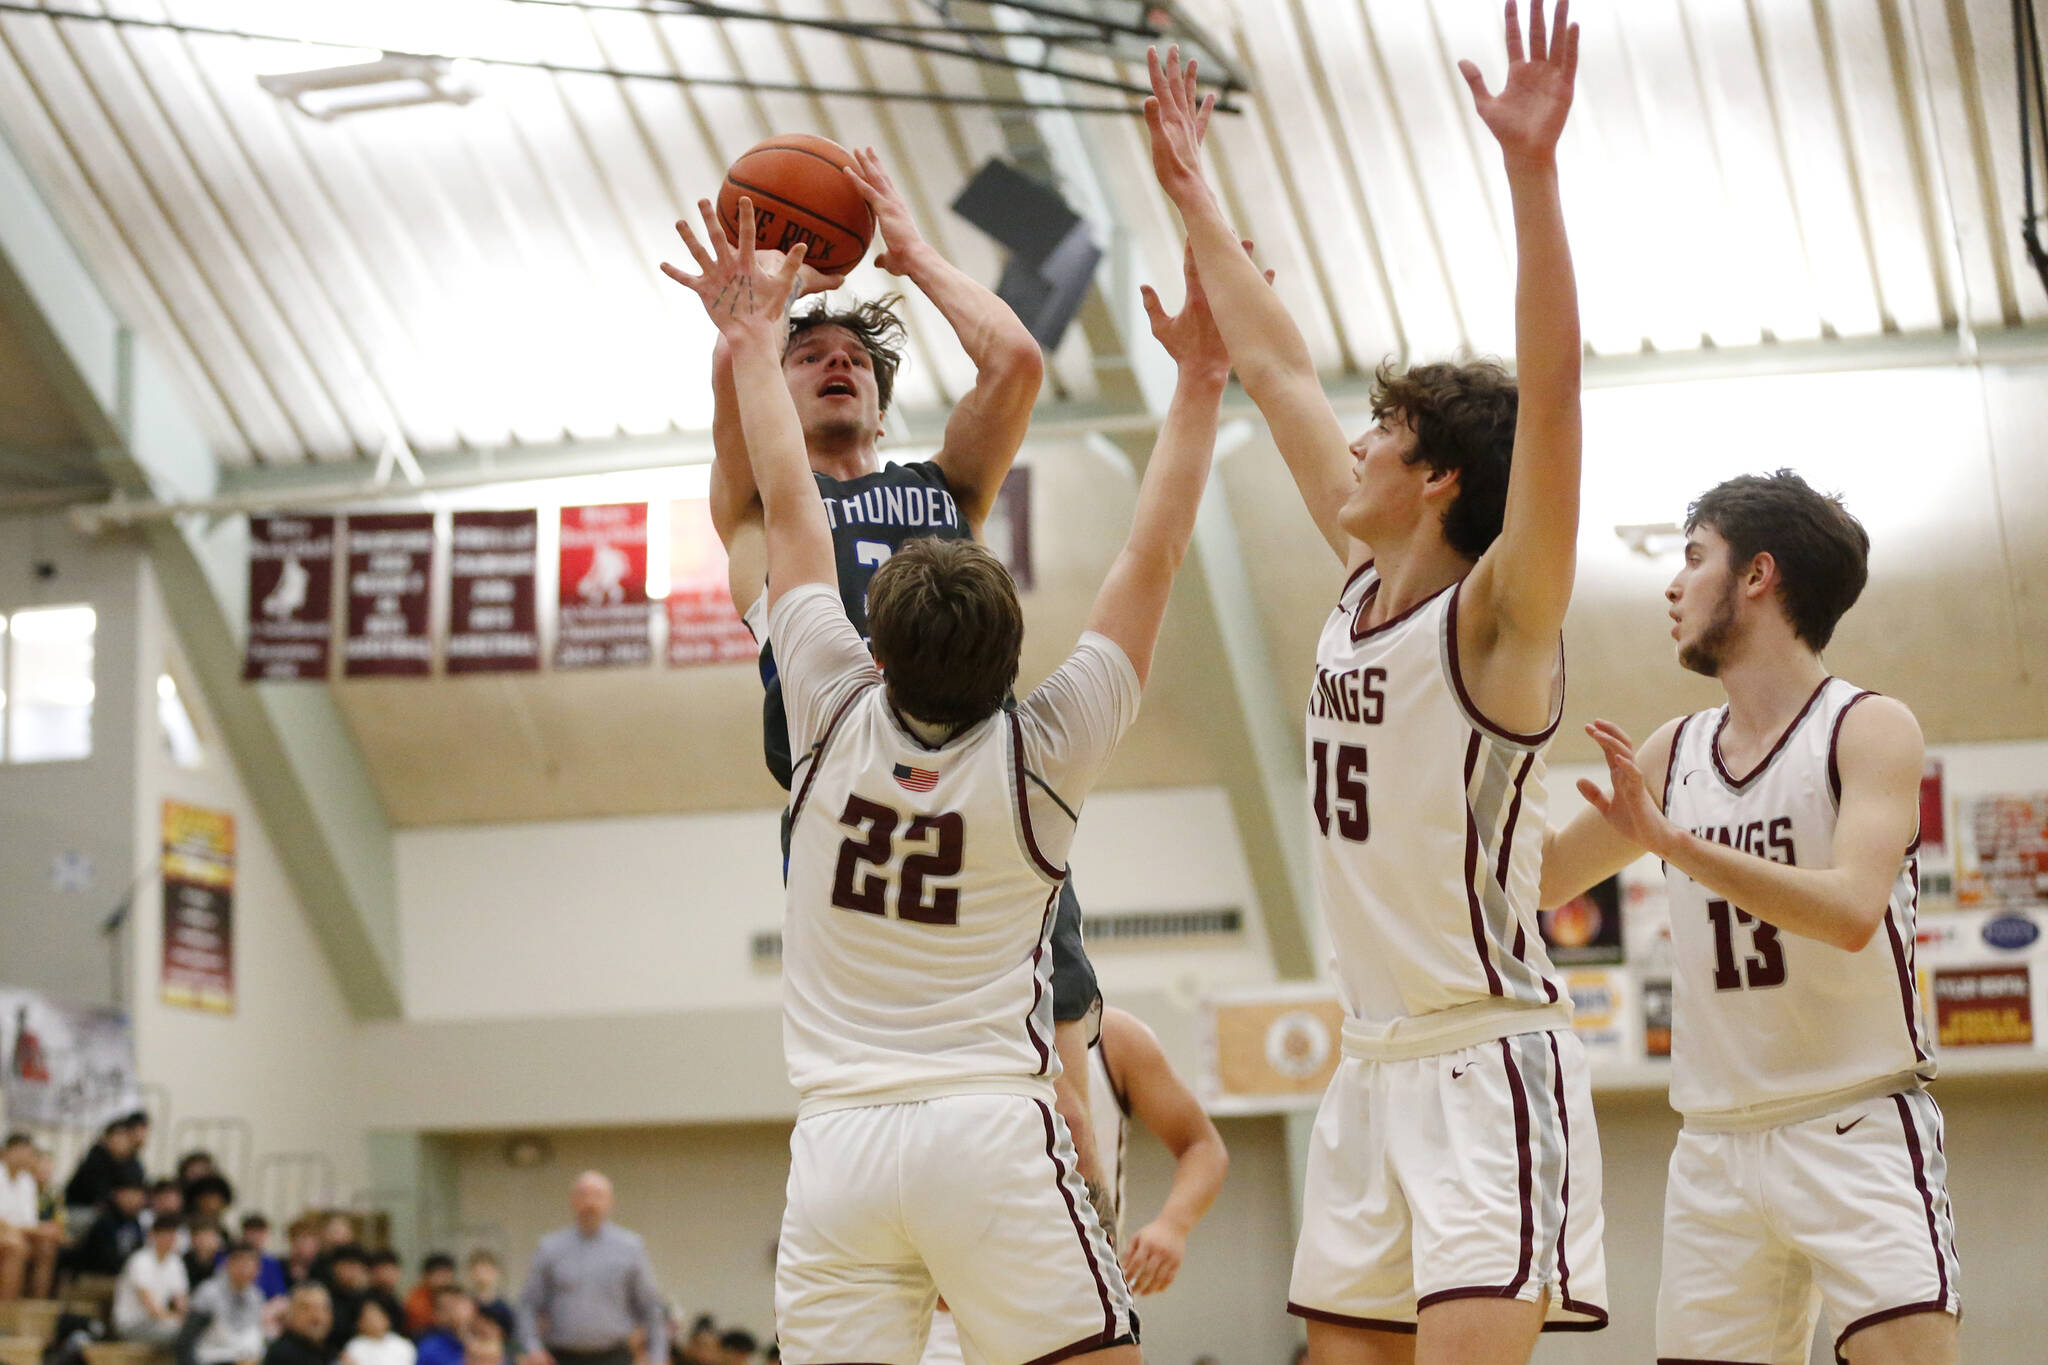 Thunder Mountain’s Thomas Baxter (30) prepares to shoot the ball as Kayhi’s Archie Dundas (22), Jared Rhoades (15), and Andrew Kleinschmidt-Guthrie (13) try to block him during Thunder Mountain’s 54-56 loss to Kayhi on Friday at Ketchikan High School. On Saturday, the Falcons won the rematch 60-58. (Christopher Mullen / Ketchikan Daily News)